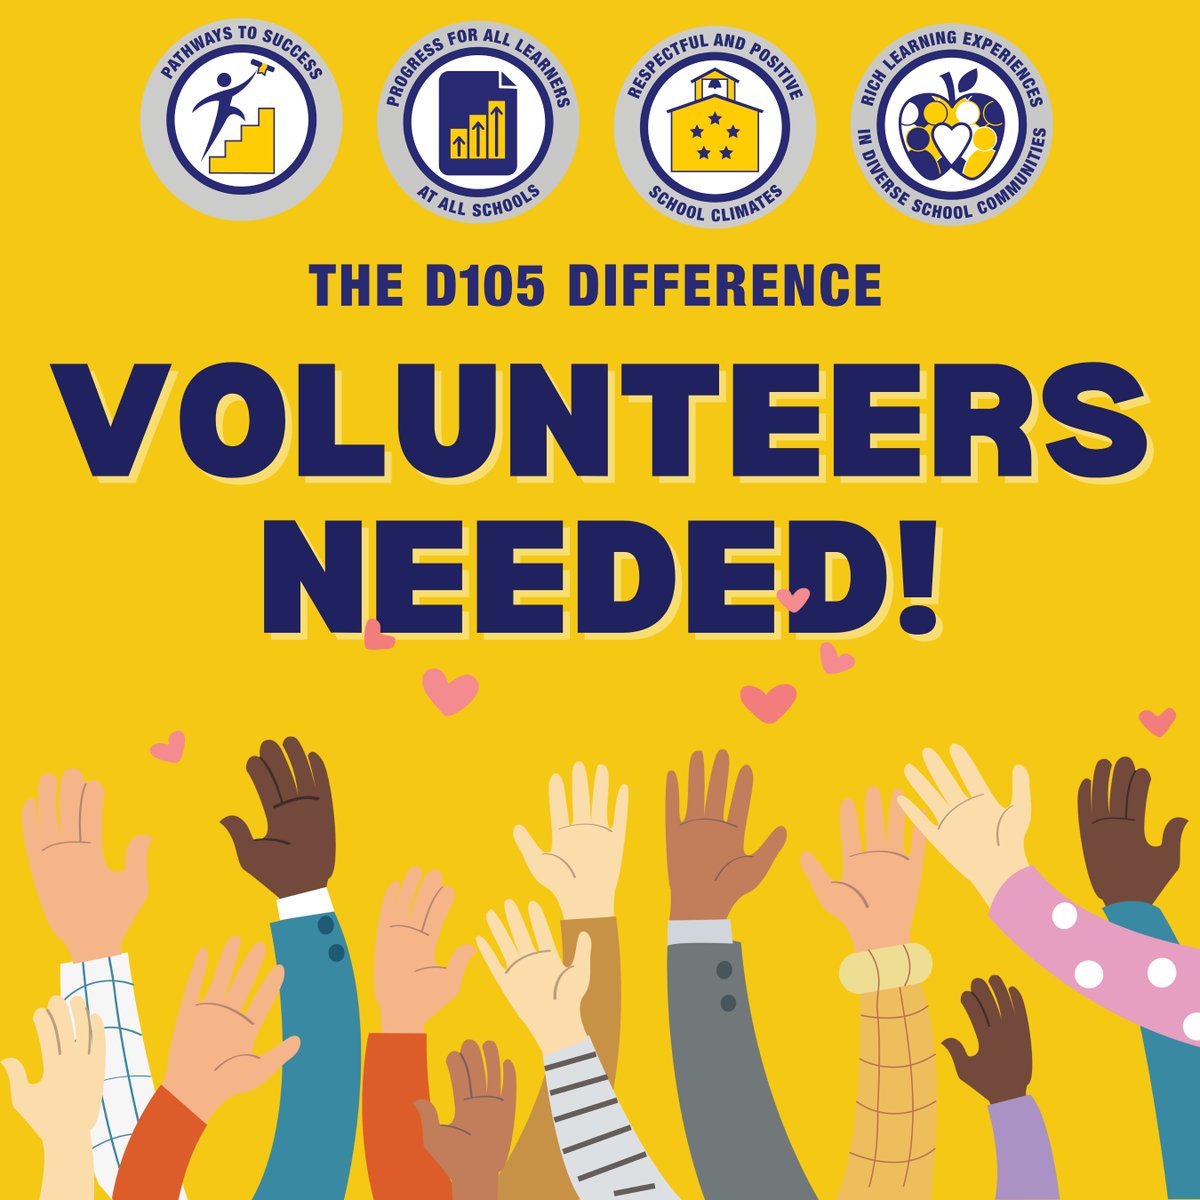 Is your teen looking for service hours? Or just something to do on Sunday morning? Sign them up to volunteer at the D105 Dash! signupgenius.com/go/30E0B4FAAAE…